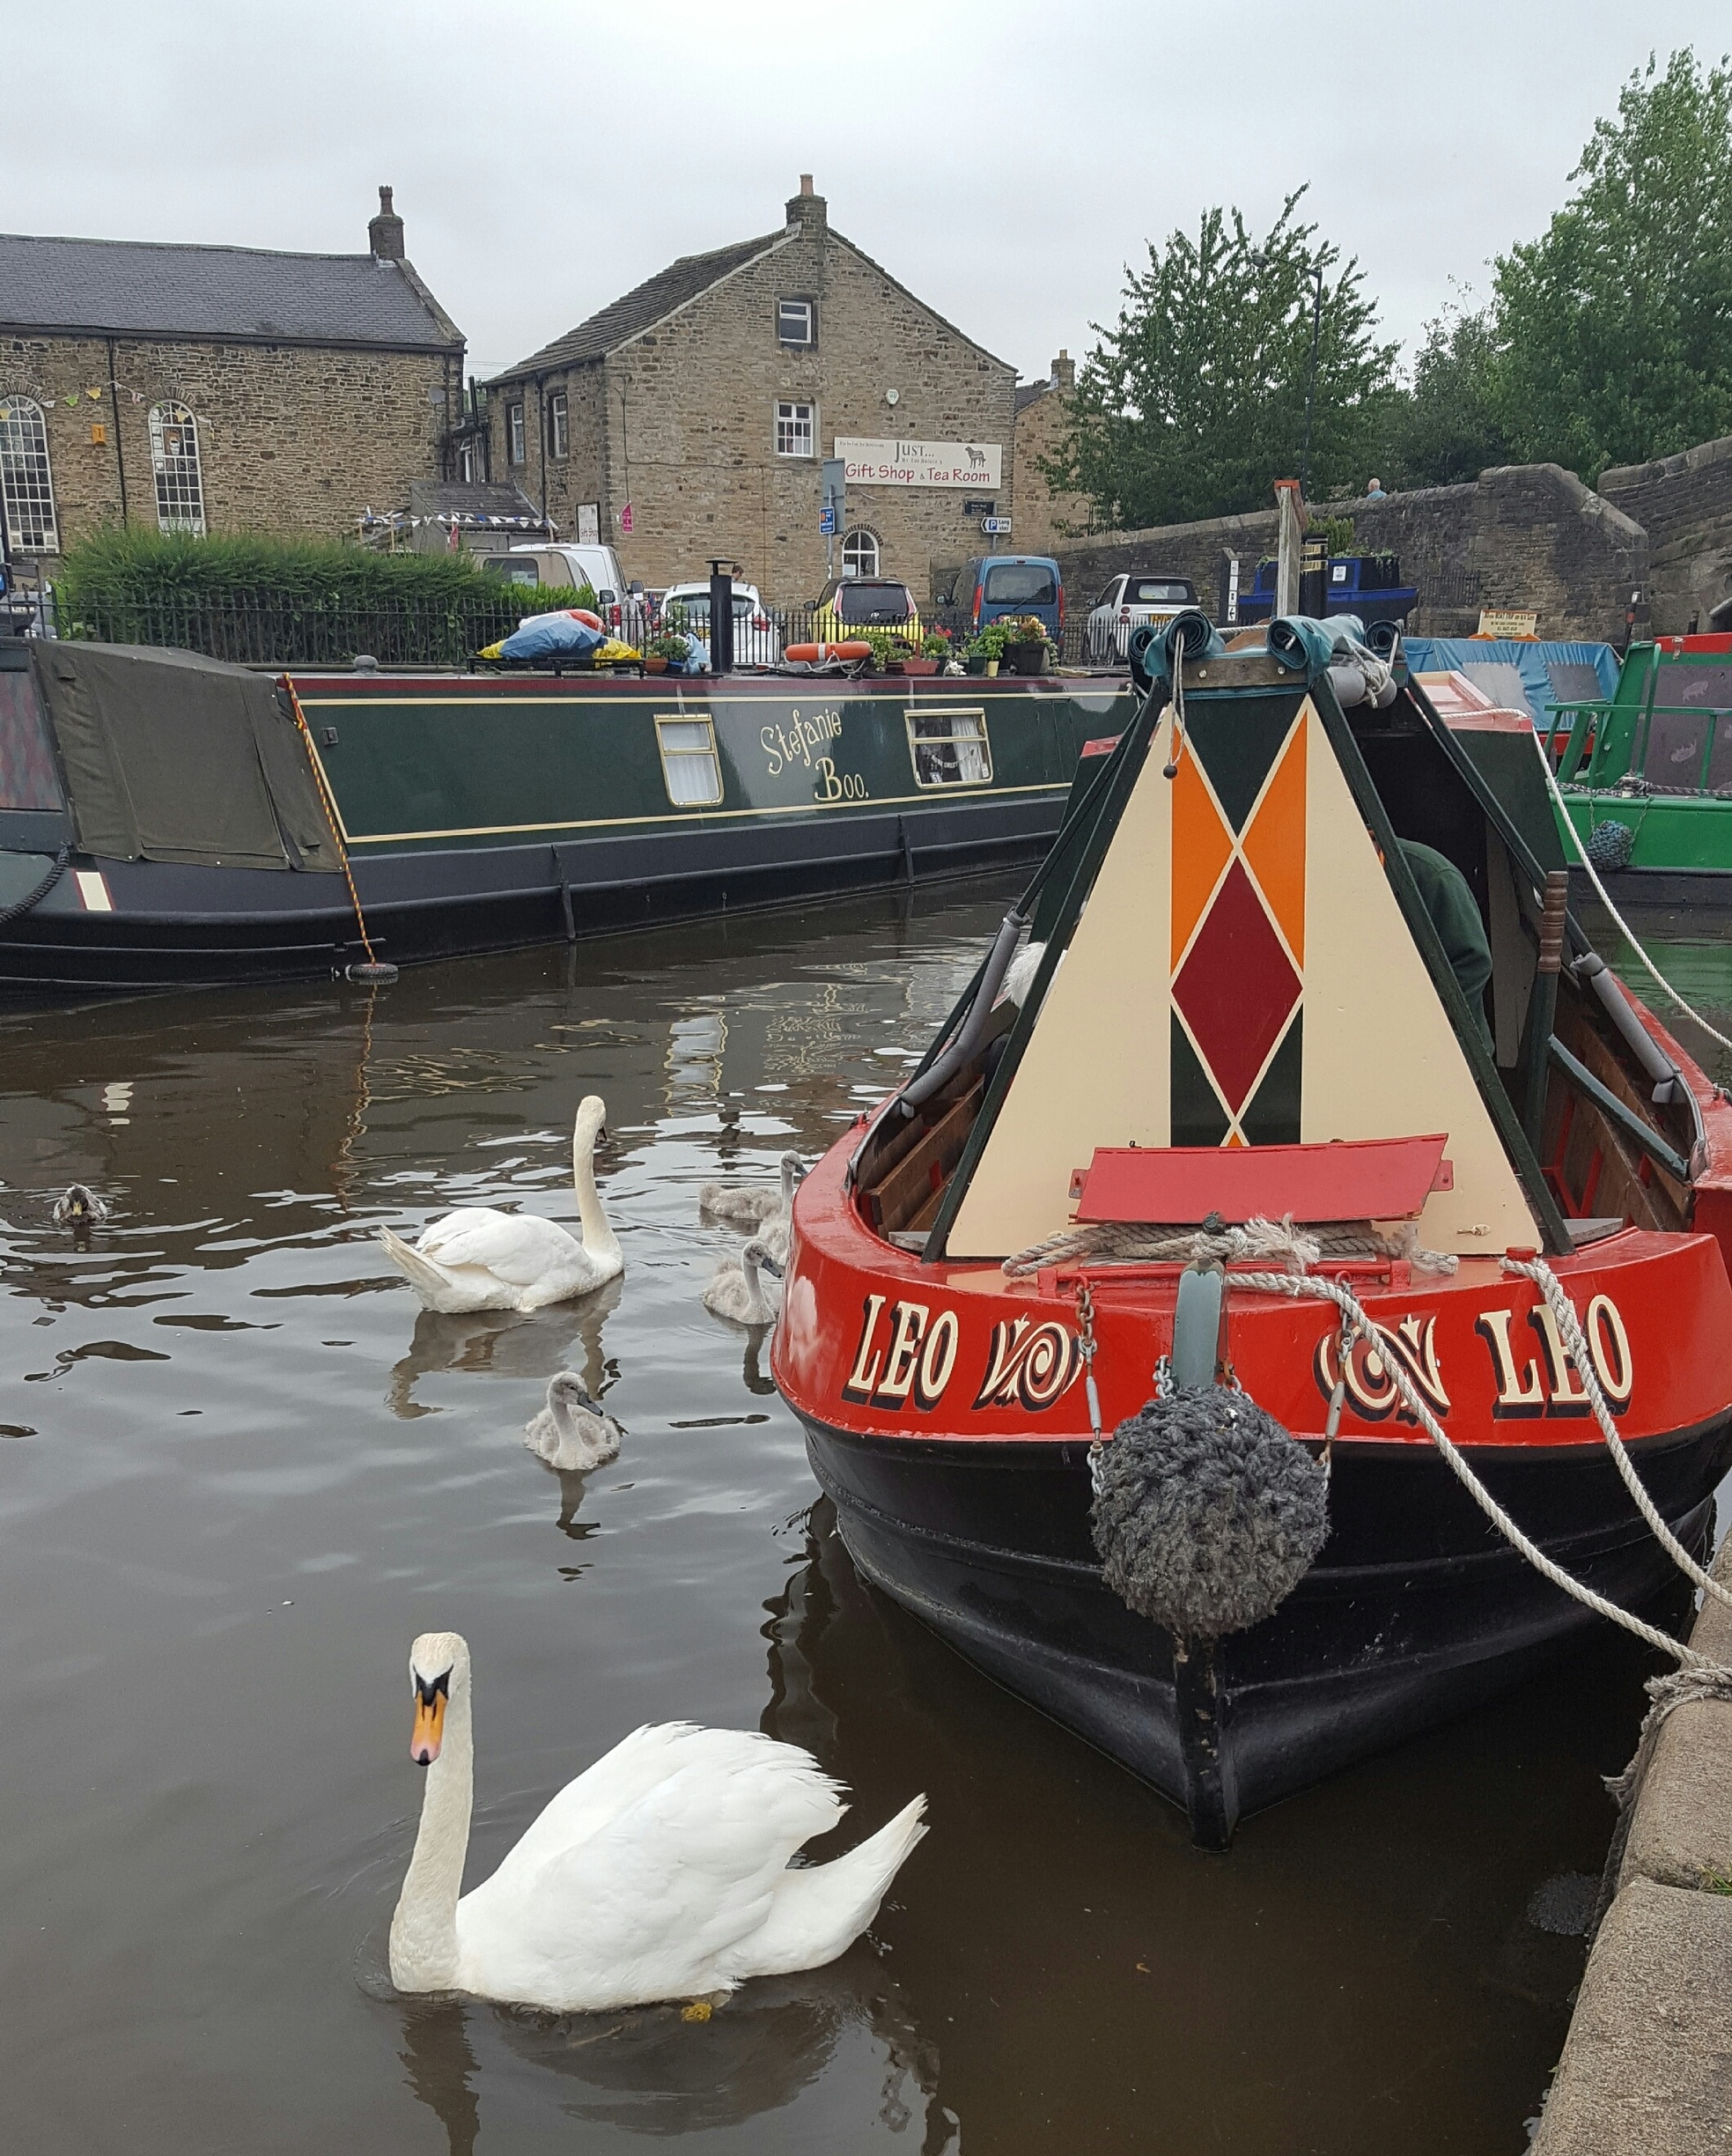 Swans and cygnets too on the canal in Skipton. The waterways are surprisingly full of nature..and beautiful barges too. 